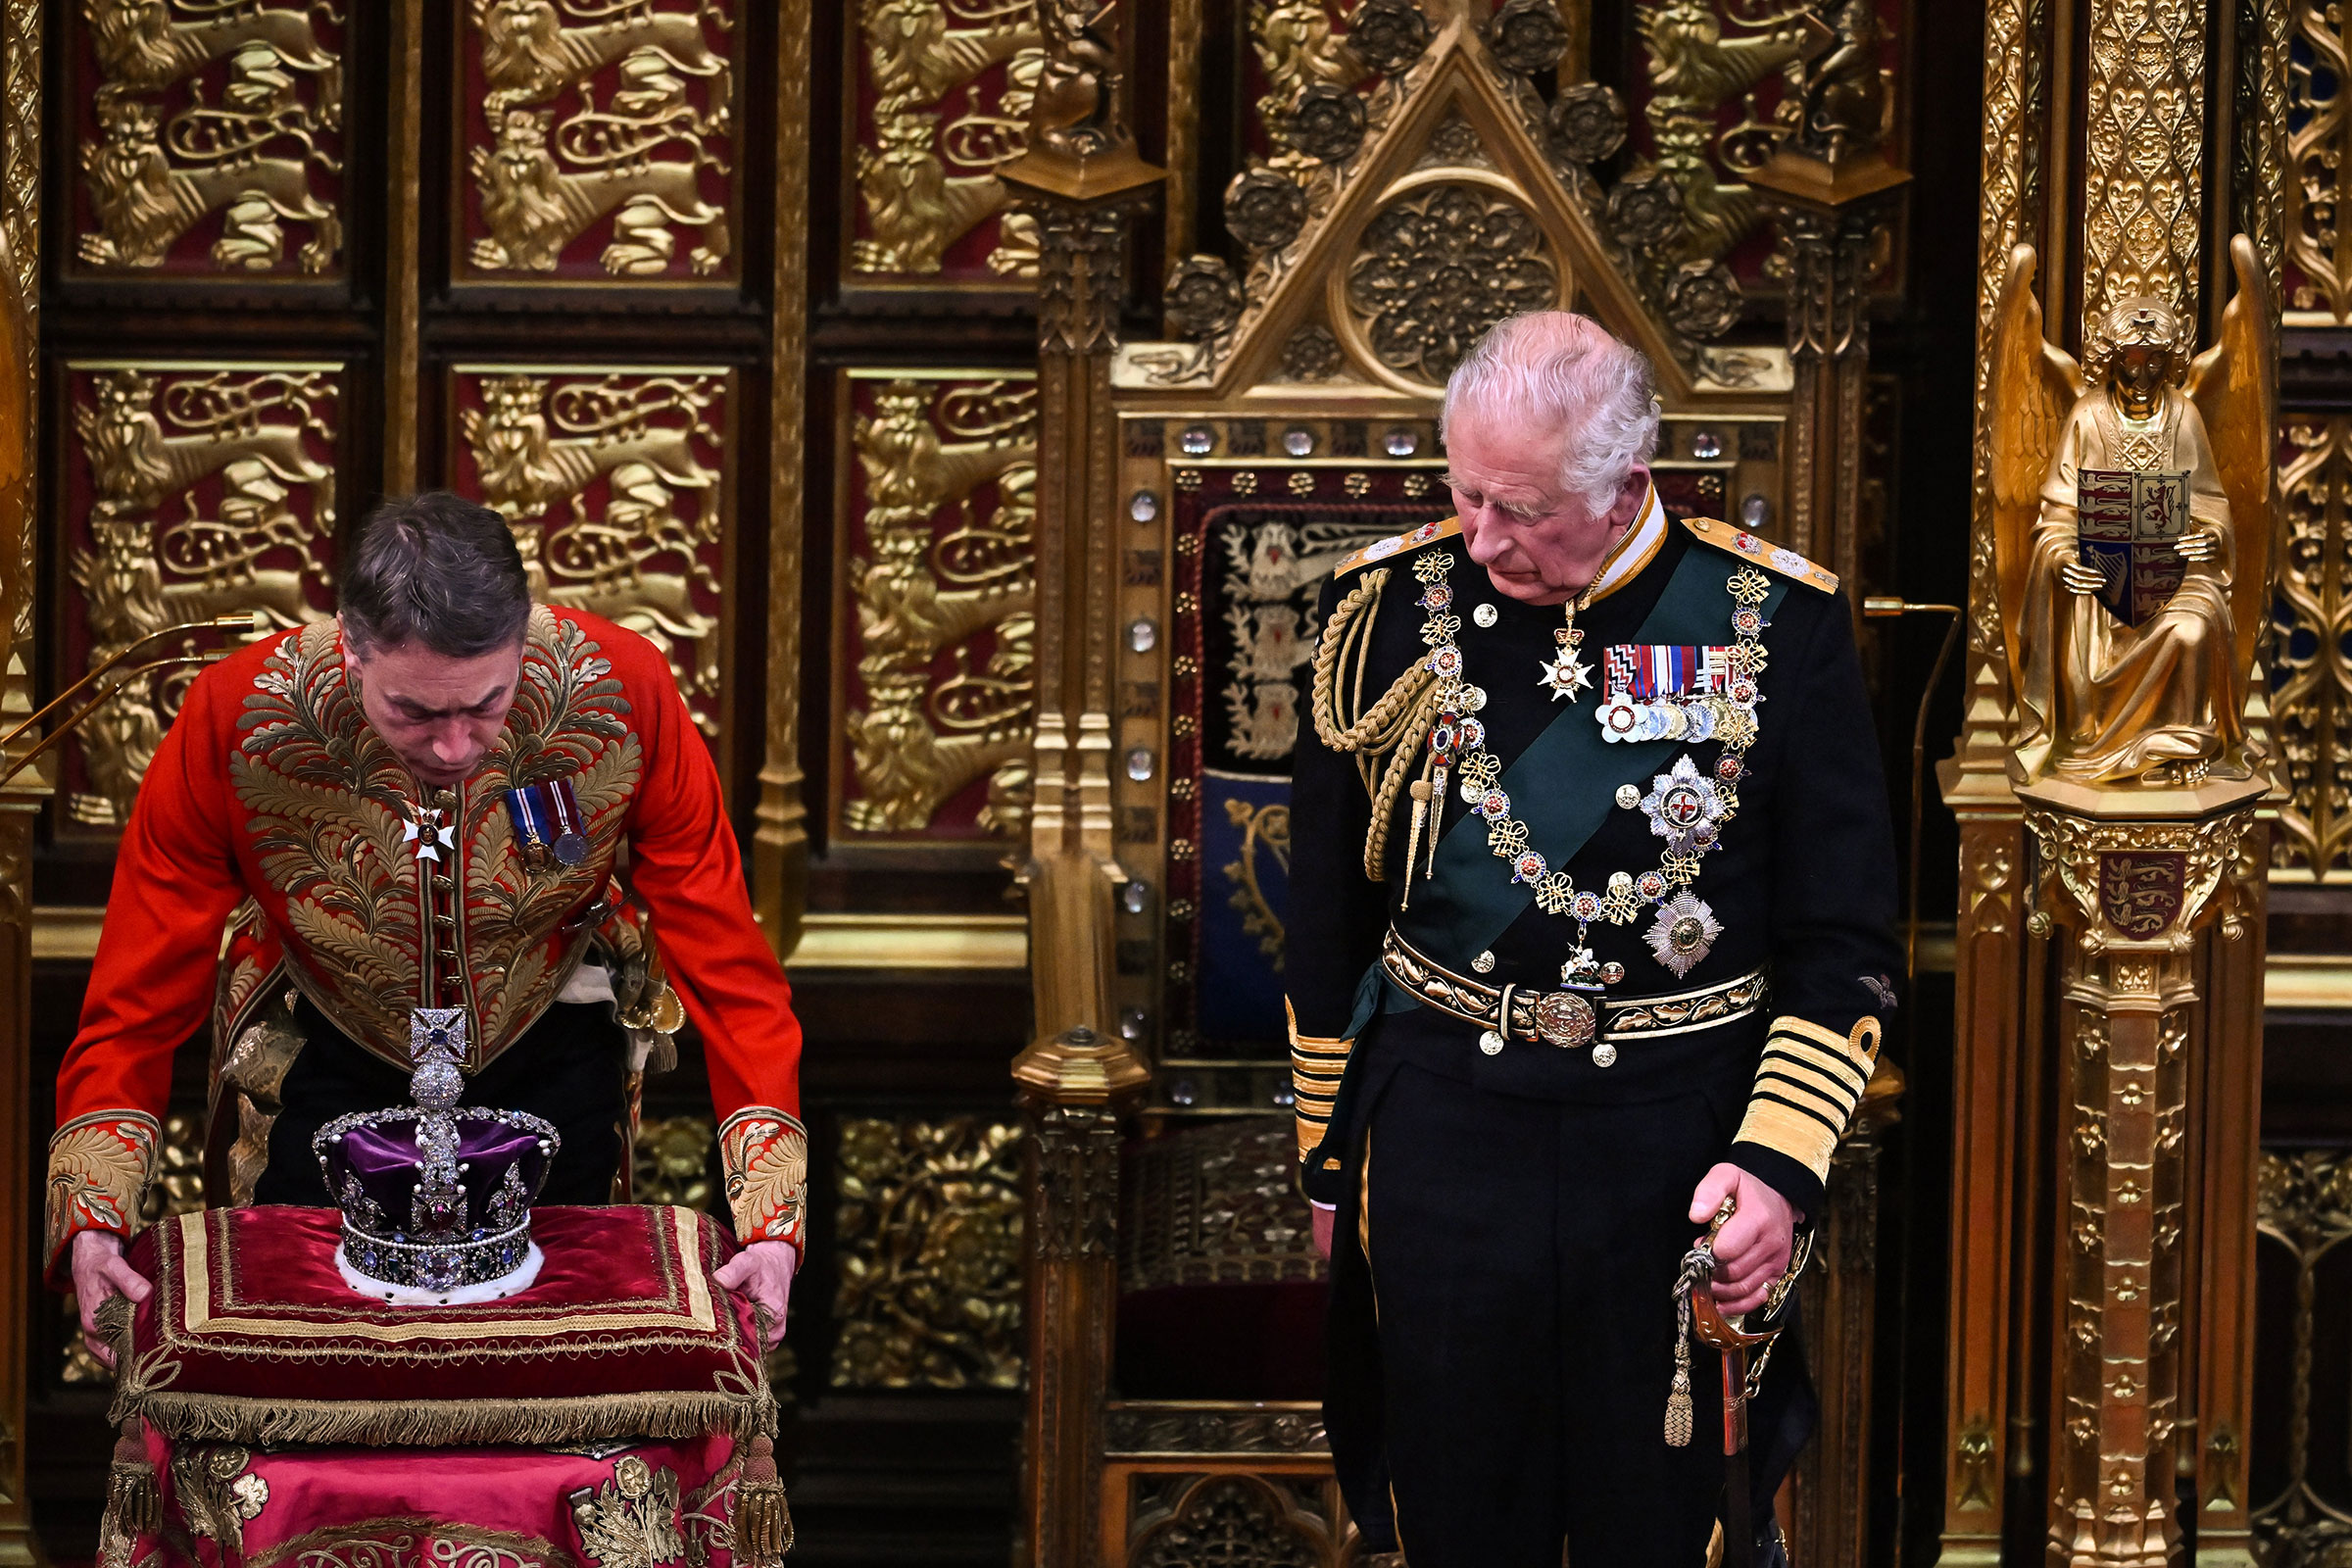 Prince Charles looks at The Imperial State Crown after delivering a speech during the State Opening of Parliament in the House of Lords at the Palace of Westminster on May 10, 2022 in London. (Ben Stansall—WPA Pool—Getty Images)